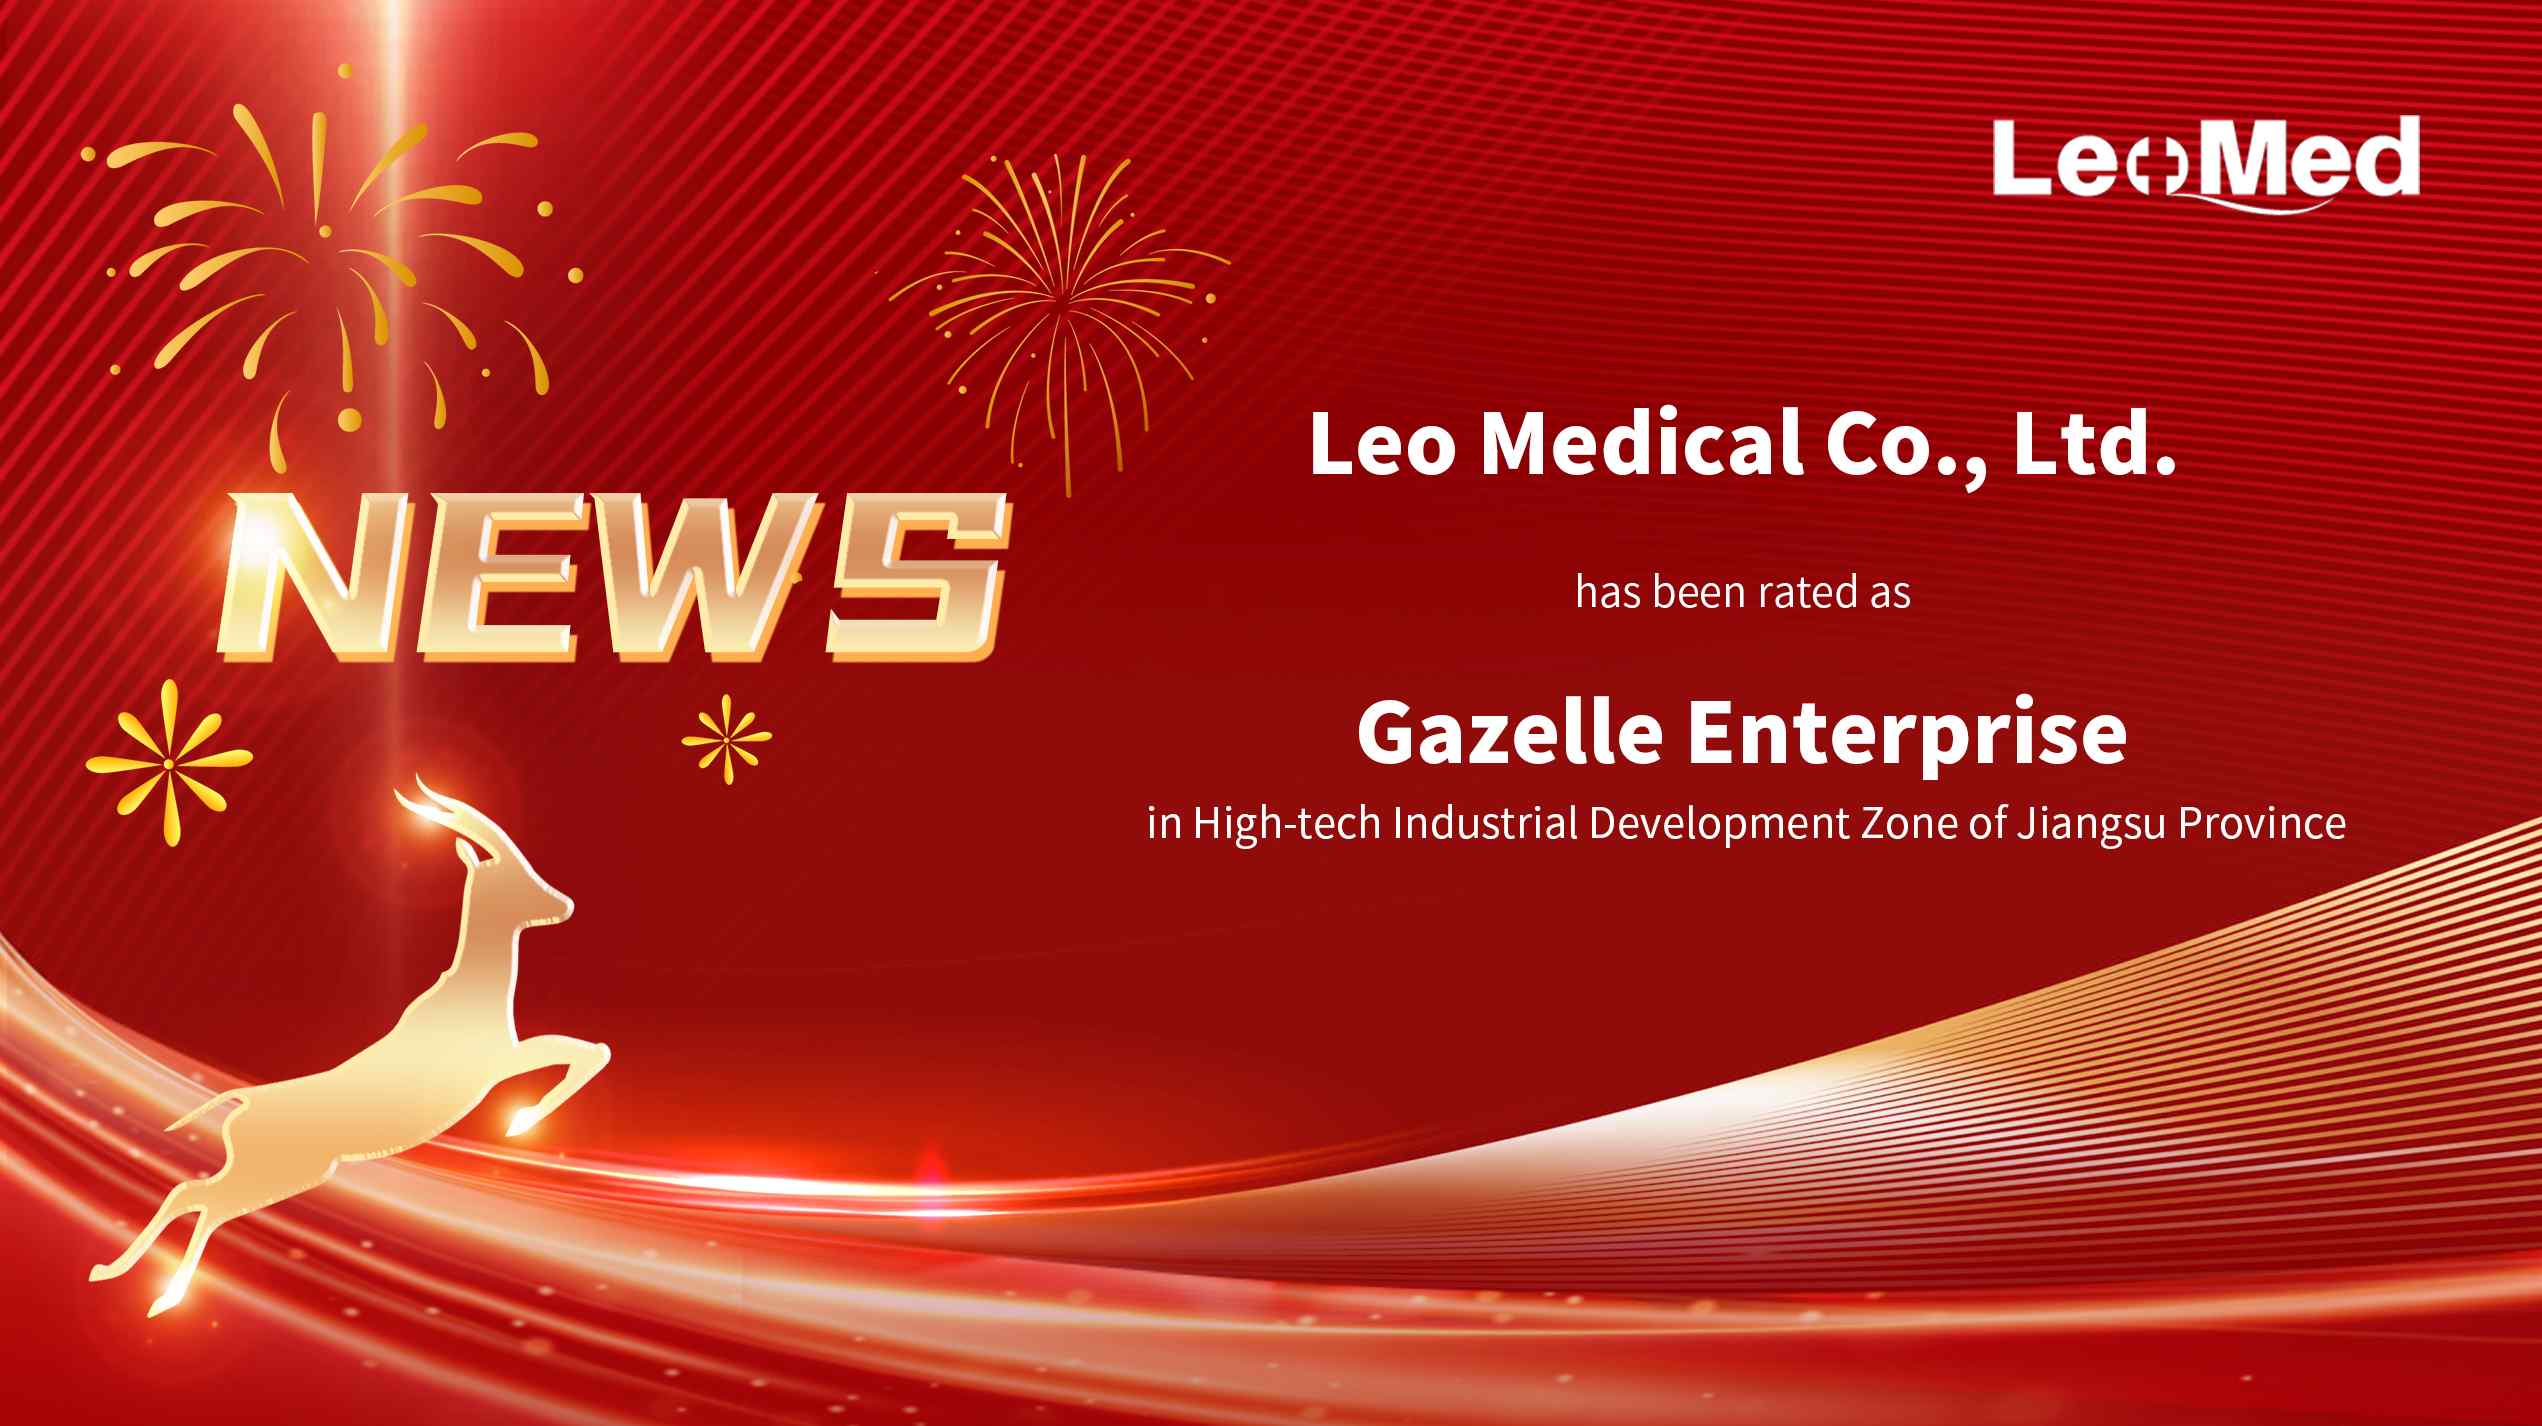 Leo_Medical_was_rated_as_the_2022_Gazelle_Enterprise_in_the_High-tech_Industrial_Development_Zone_of_Jiangsu_Province.jpg